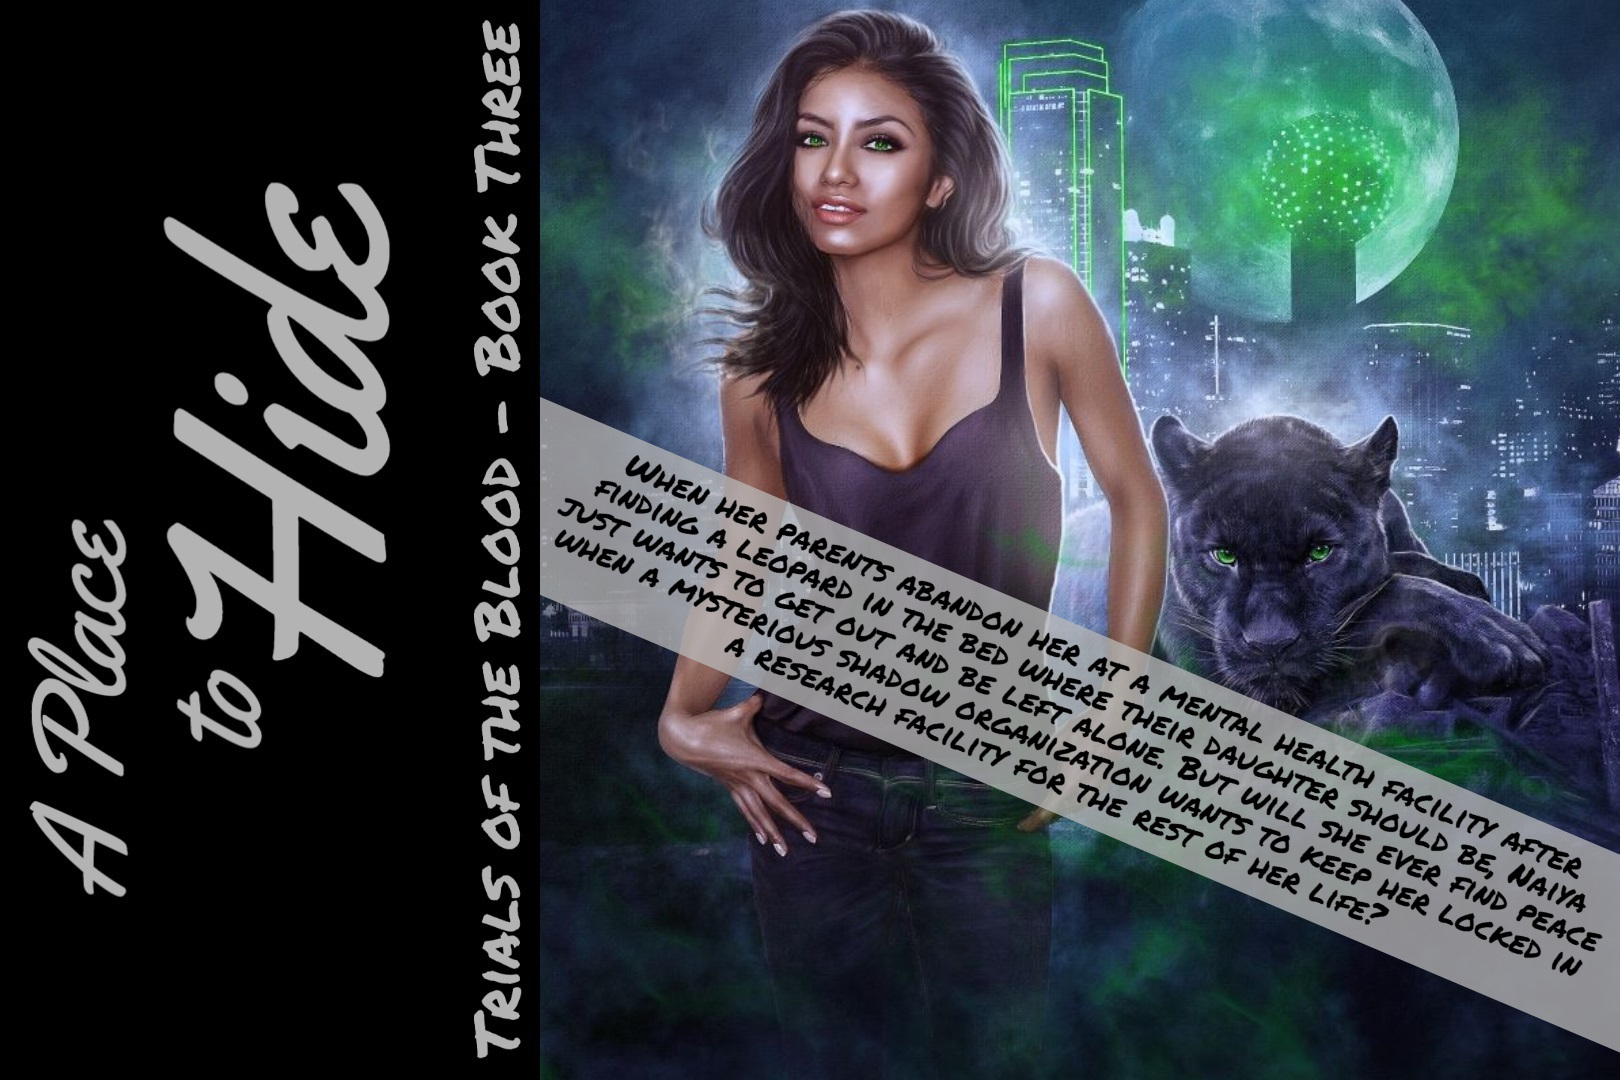 A PLACE TO HIDE - TRIALS OF THE BLOOD, BOOK THREE - When her parents abandon her at a mental health facility after finding a leopard in the bed where their daughter should be, Naiya just wants to get out and be left alone. But will she ever find peace when a mysterious shadow organization wants to keep her locked in a research facility for the rest of her life? - Available NOW at all major retailers! 